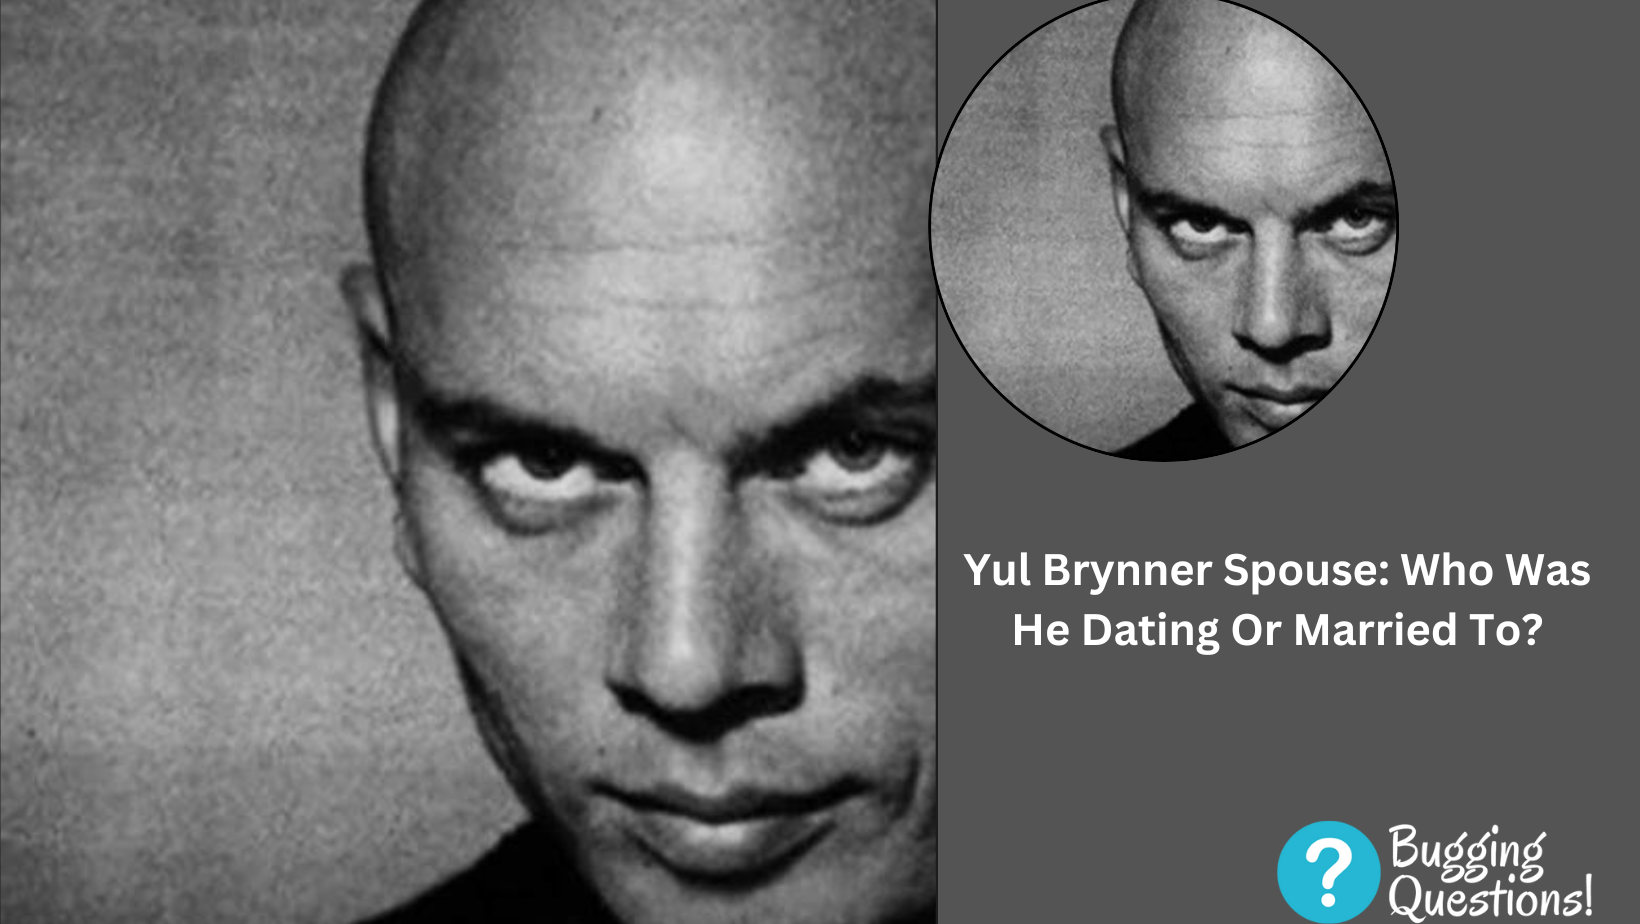 Yul Brynner Spouse: Who Was He Dating Or Married To?